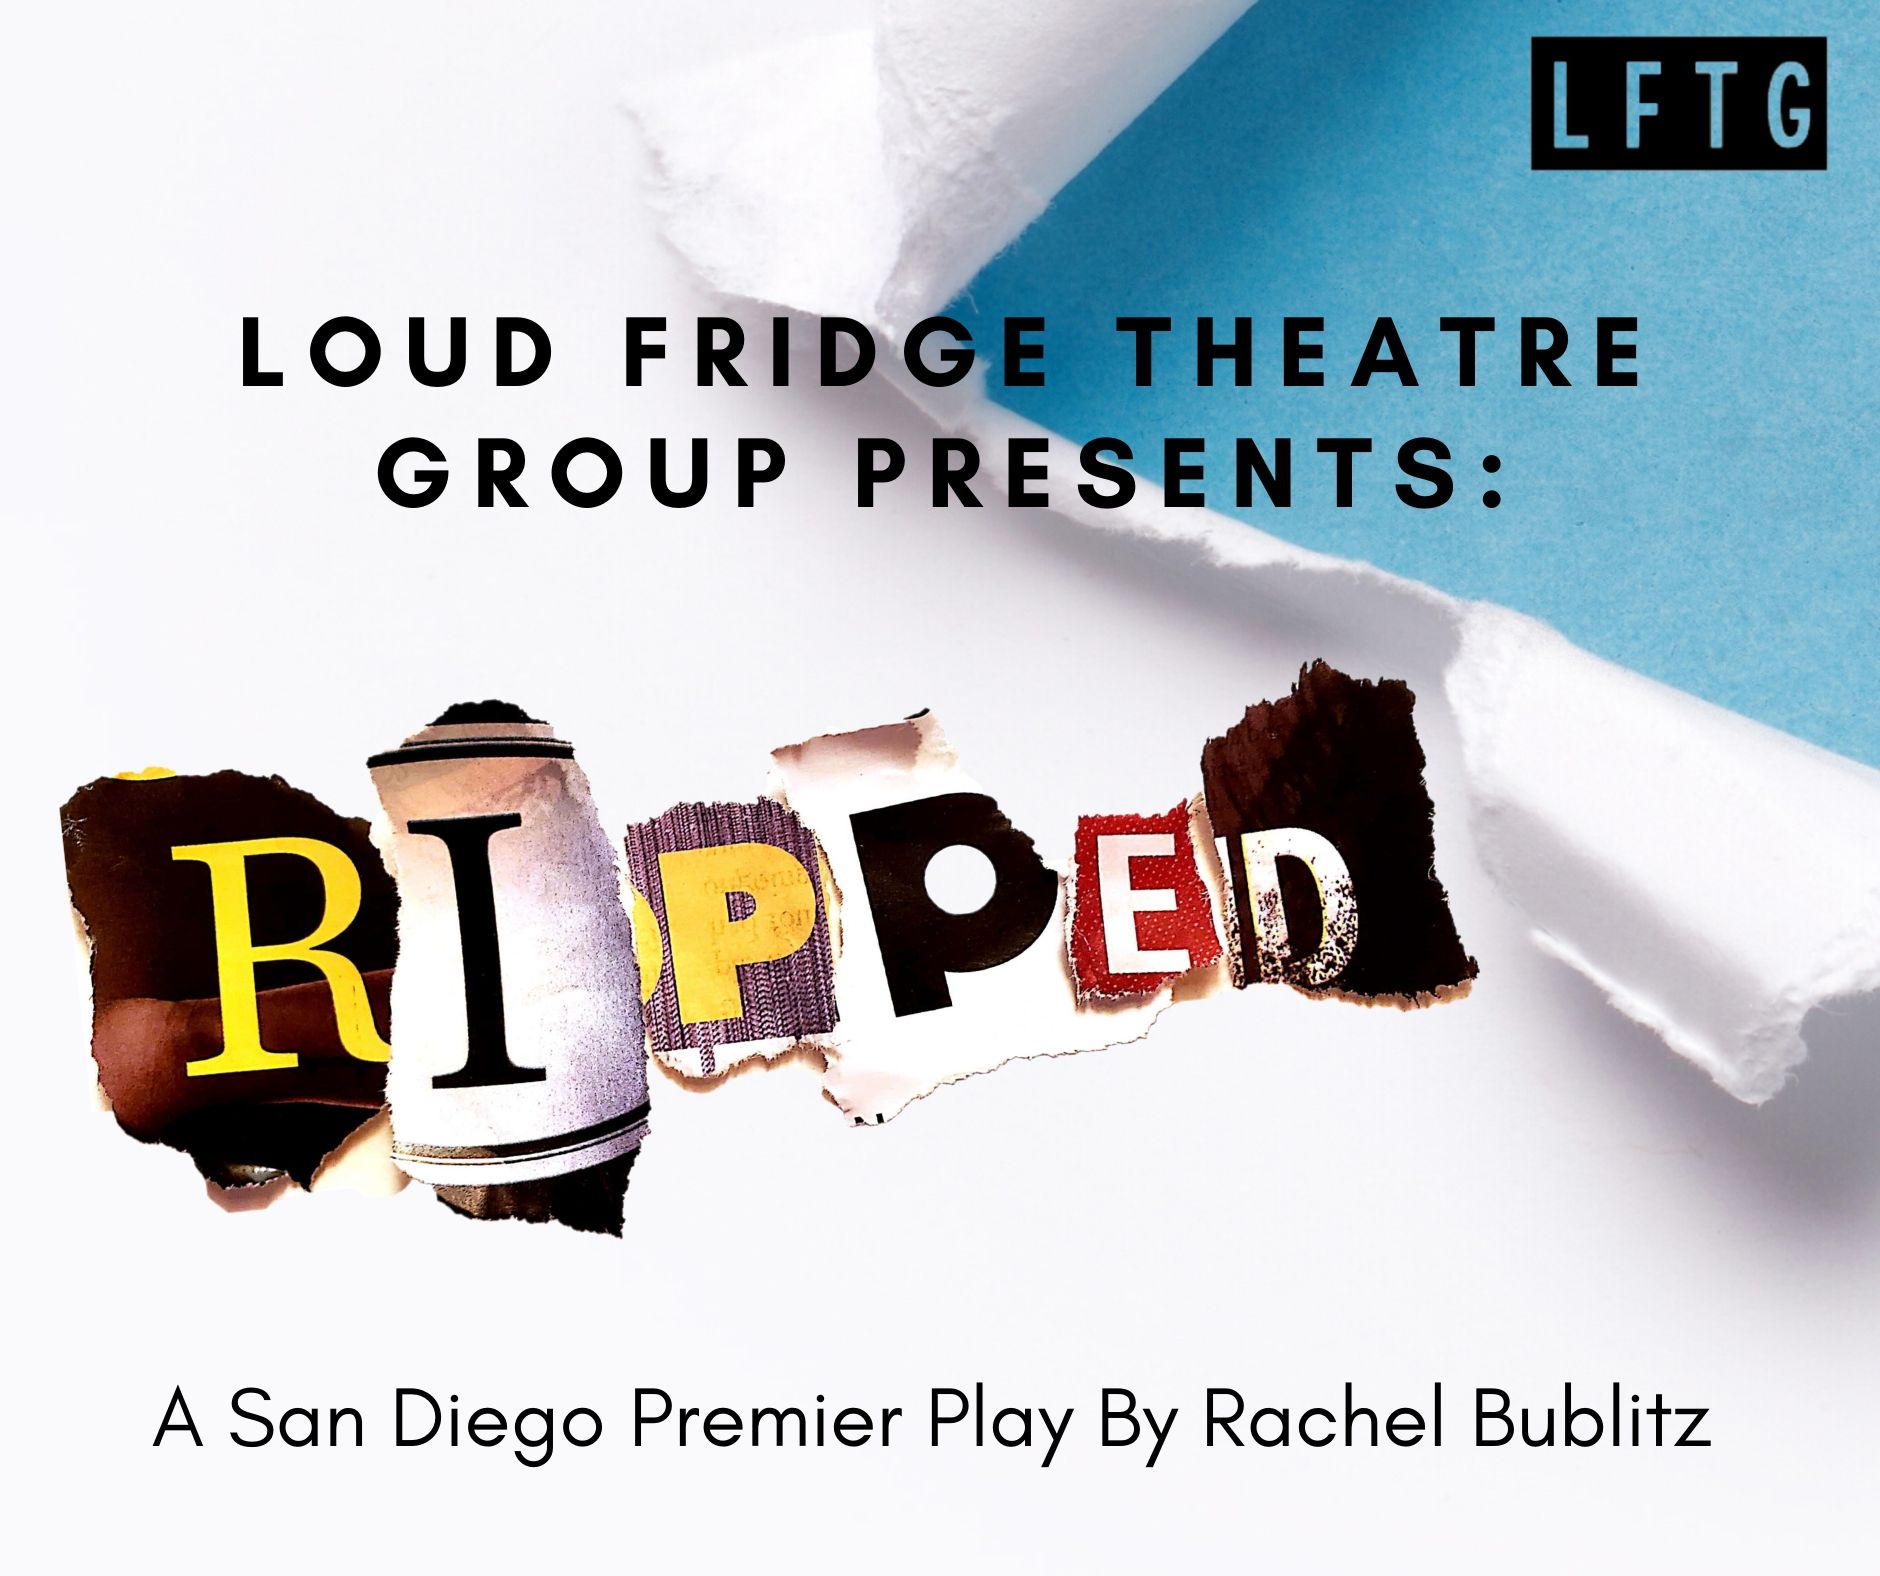 Postcard for RIPPED at Loud Fridge Theatre Group.